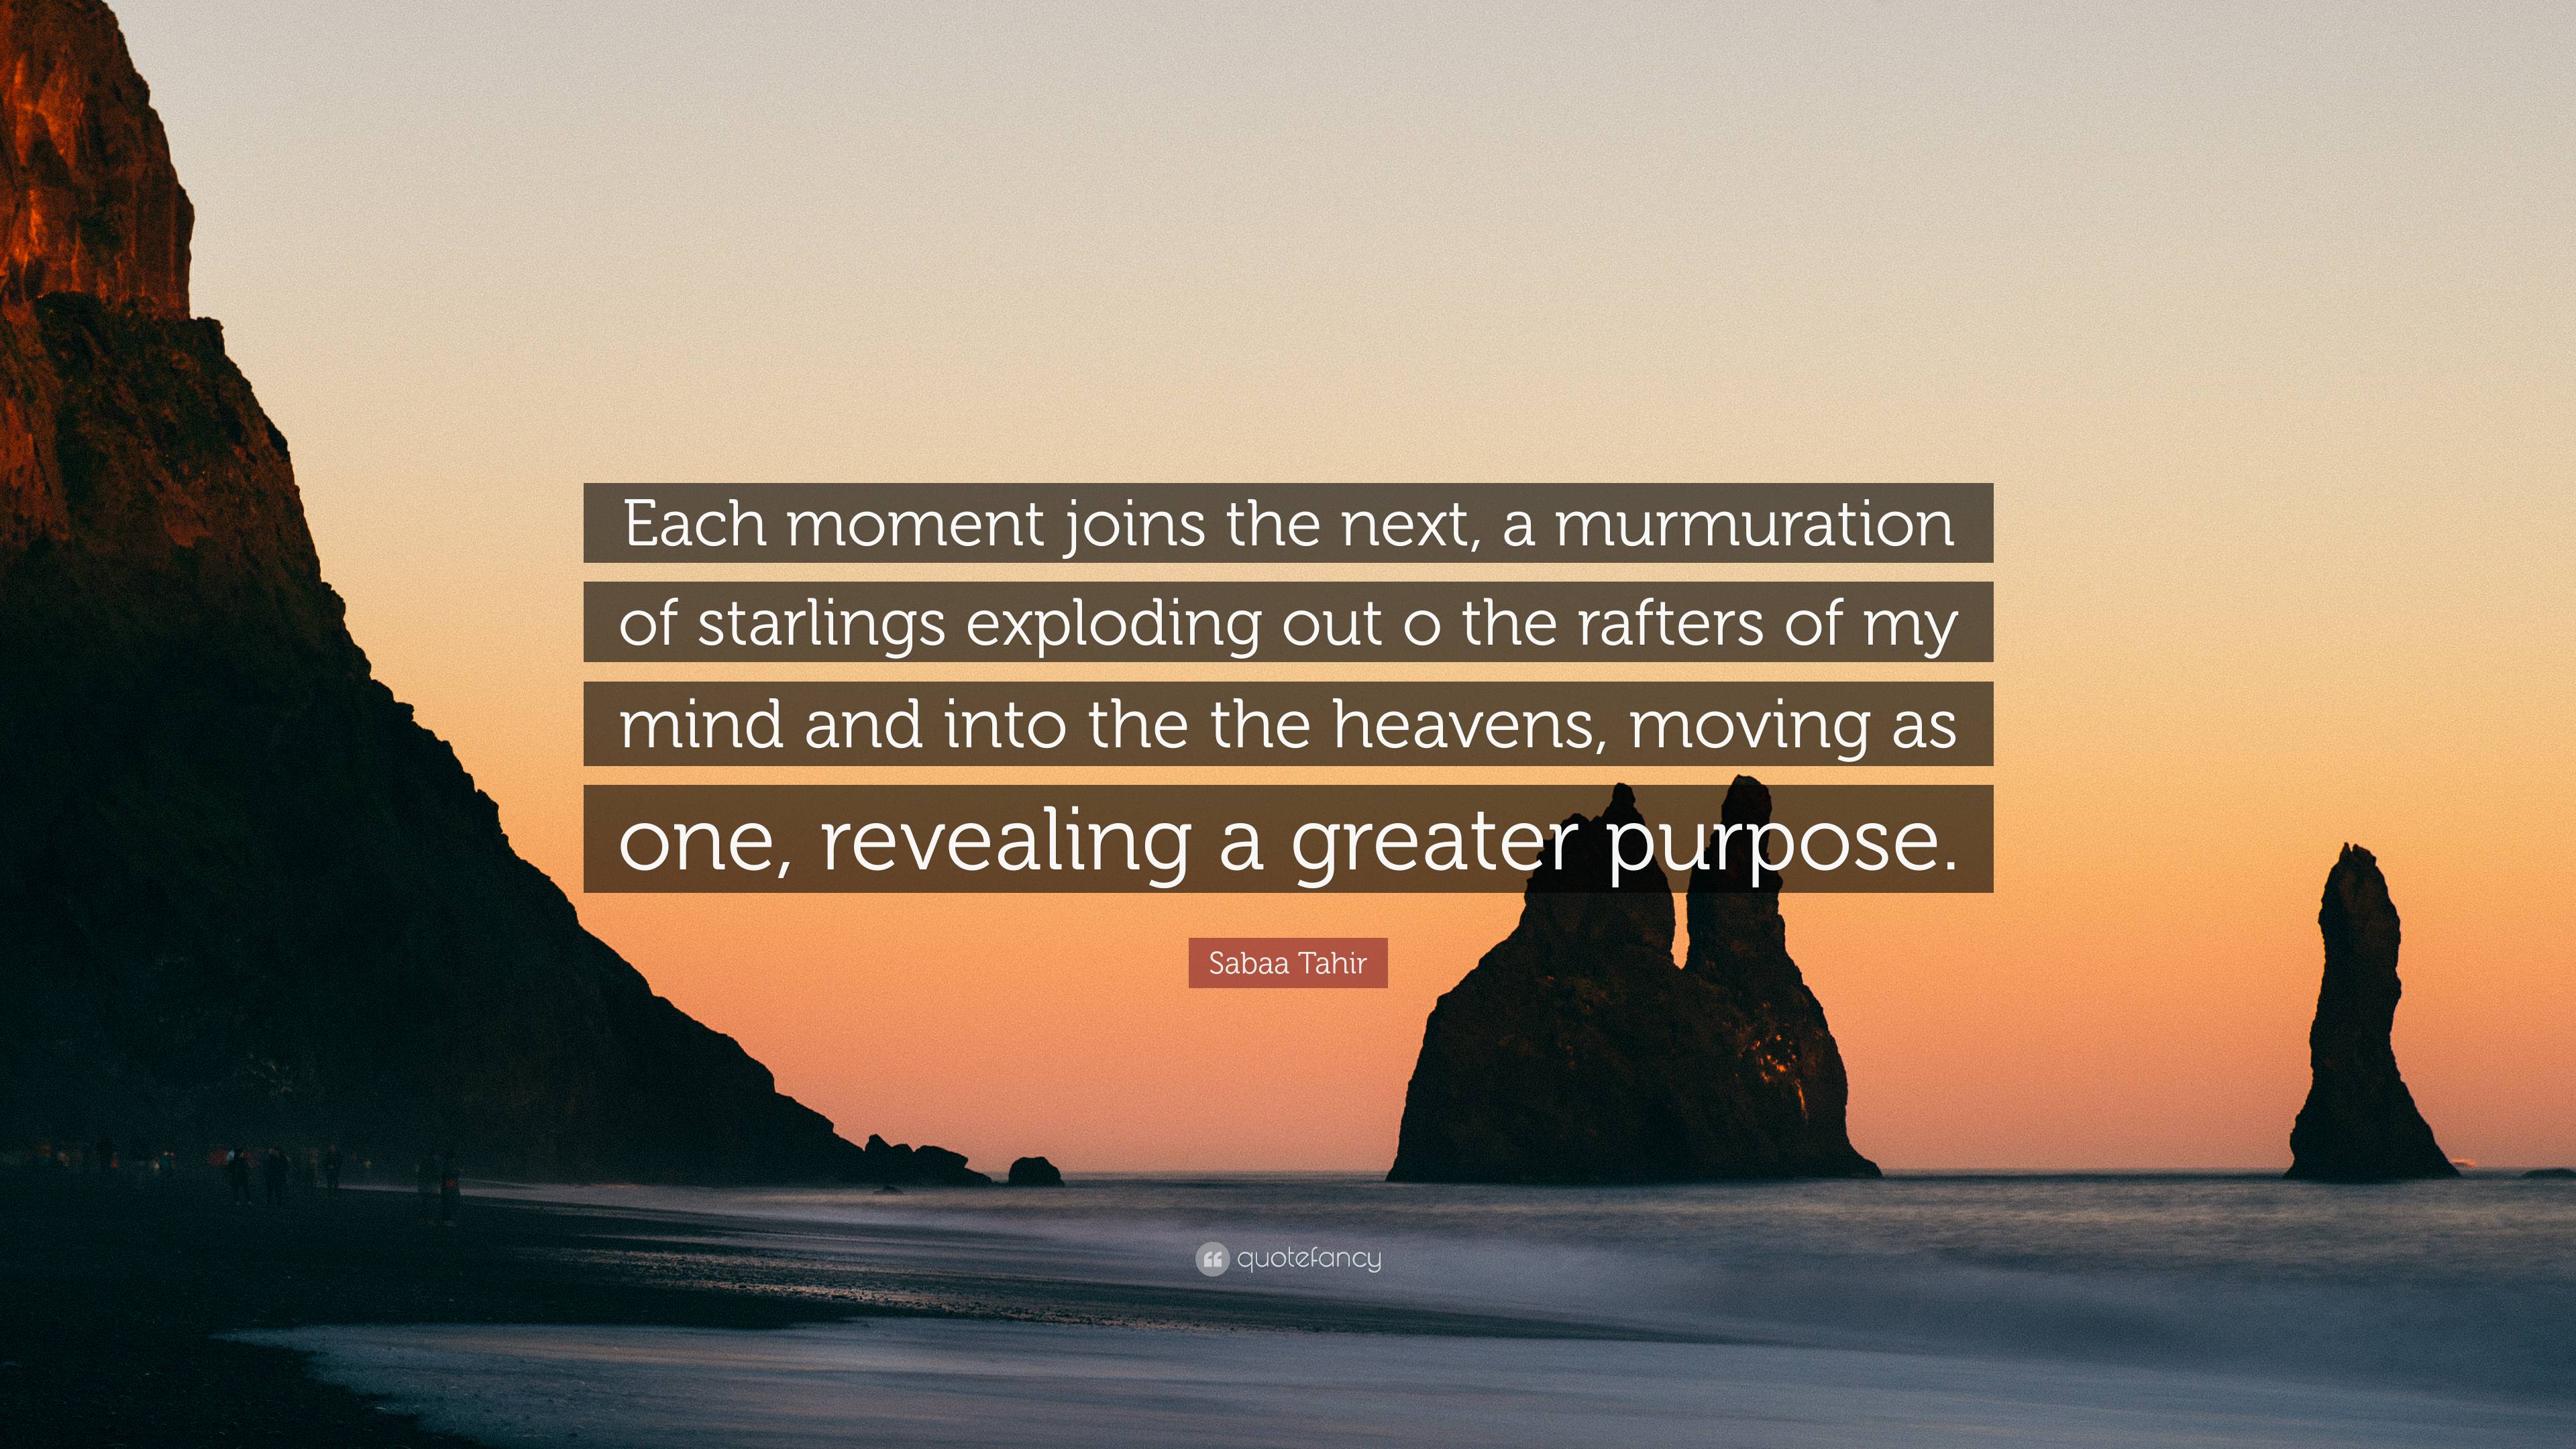 Sabaa Tahir Quote: “Each moment joins the next, a murmuration of ...